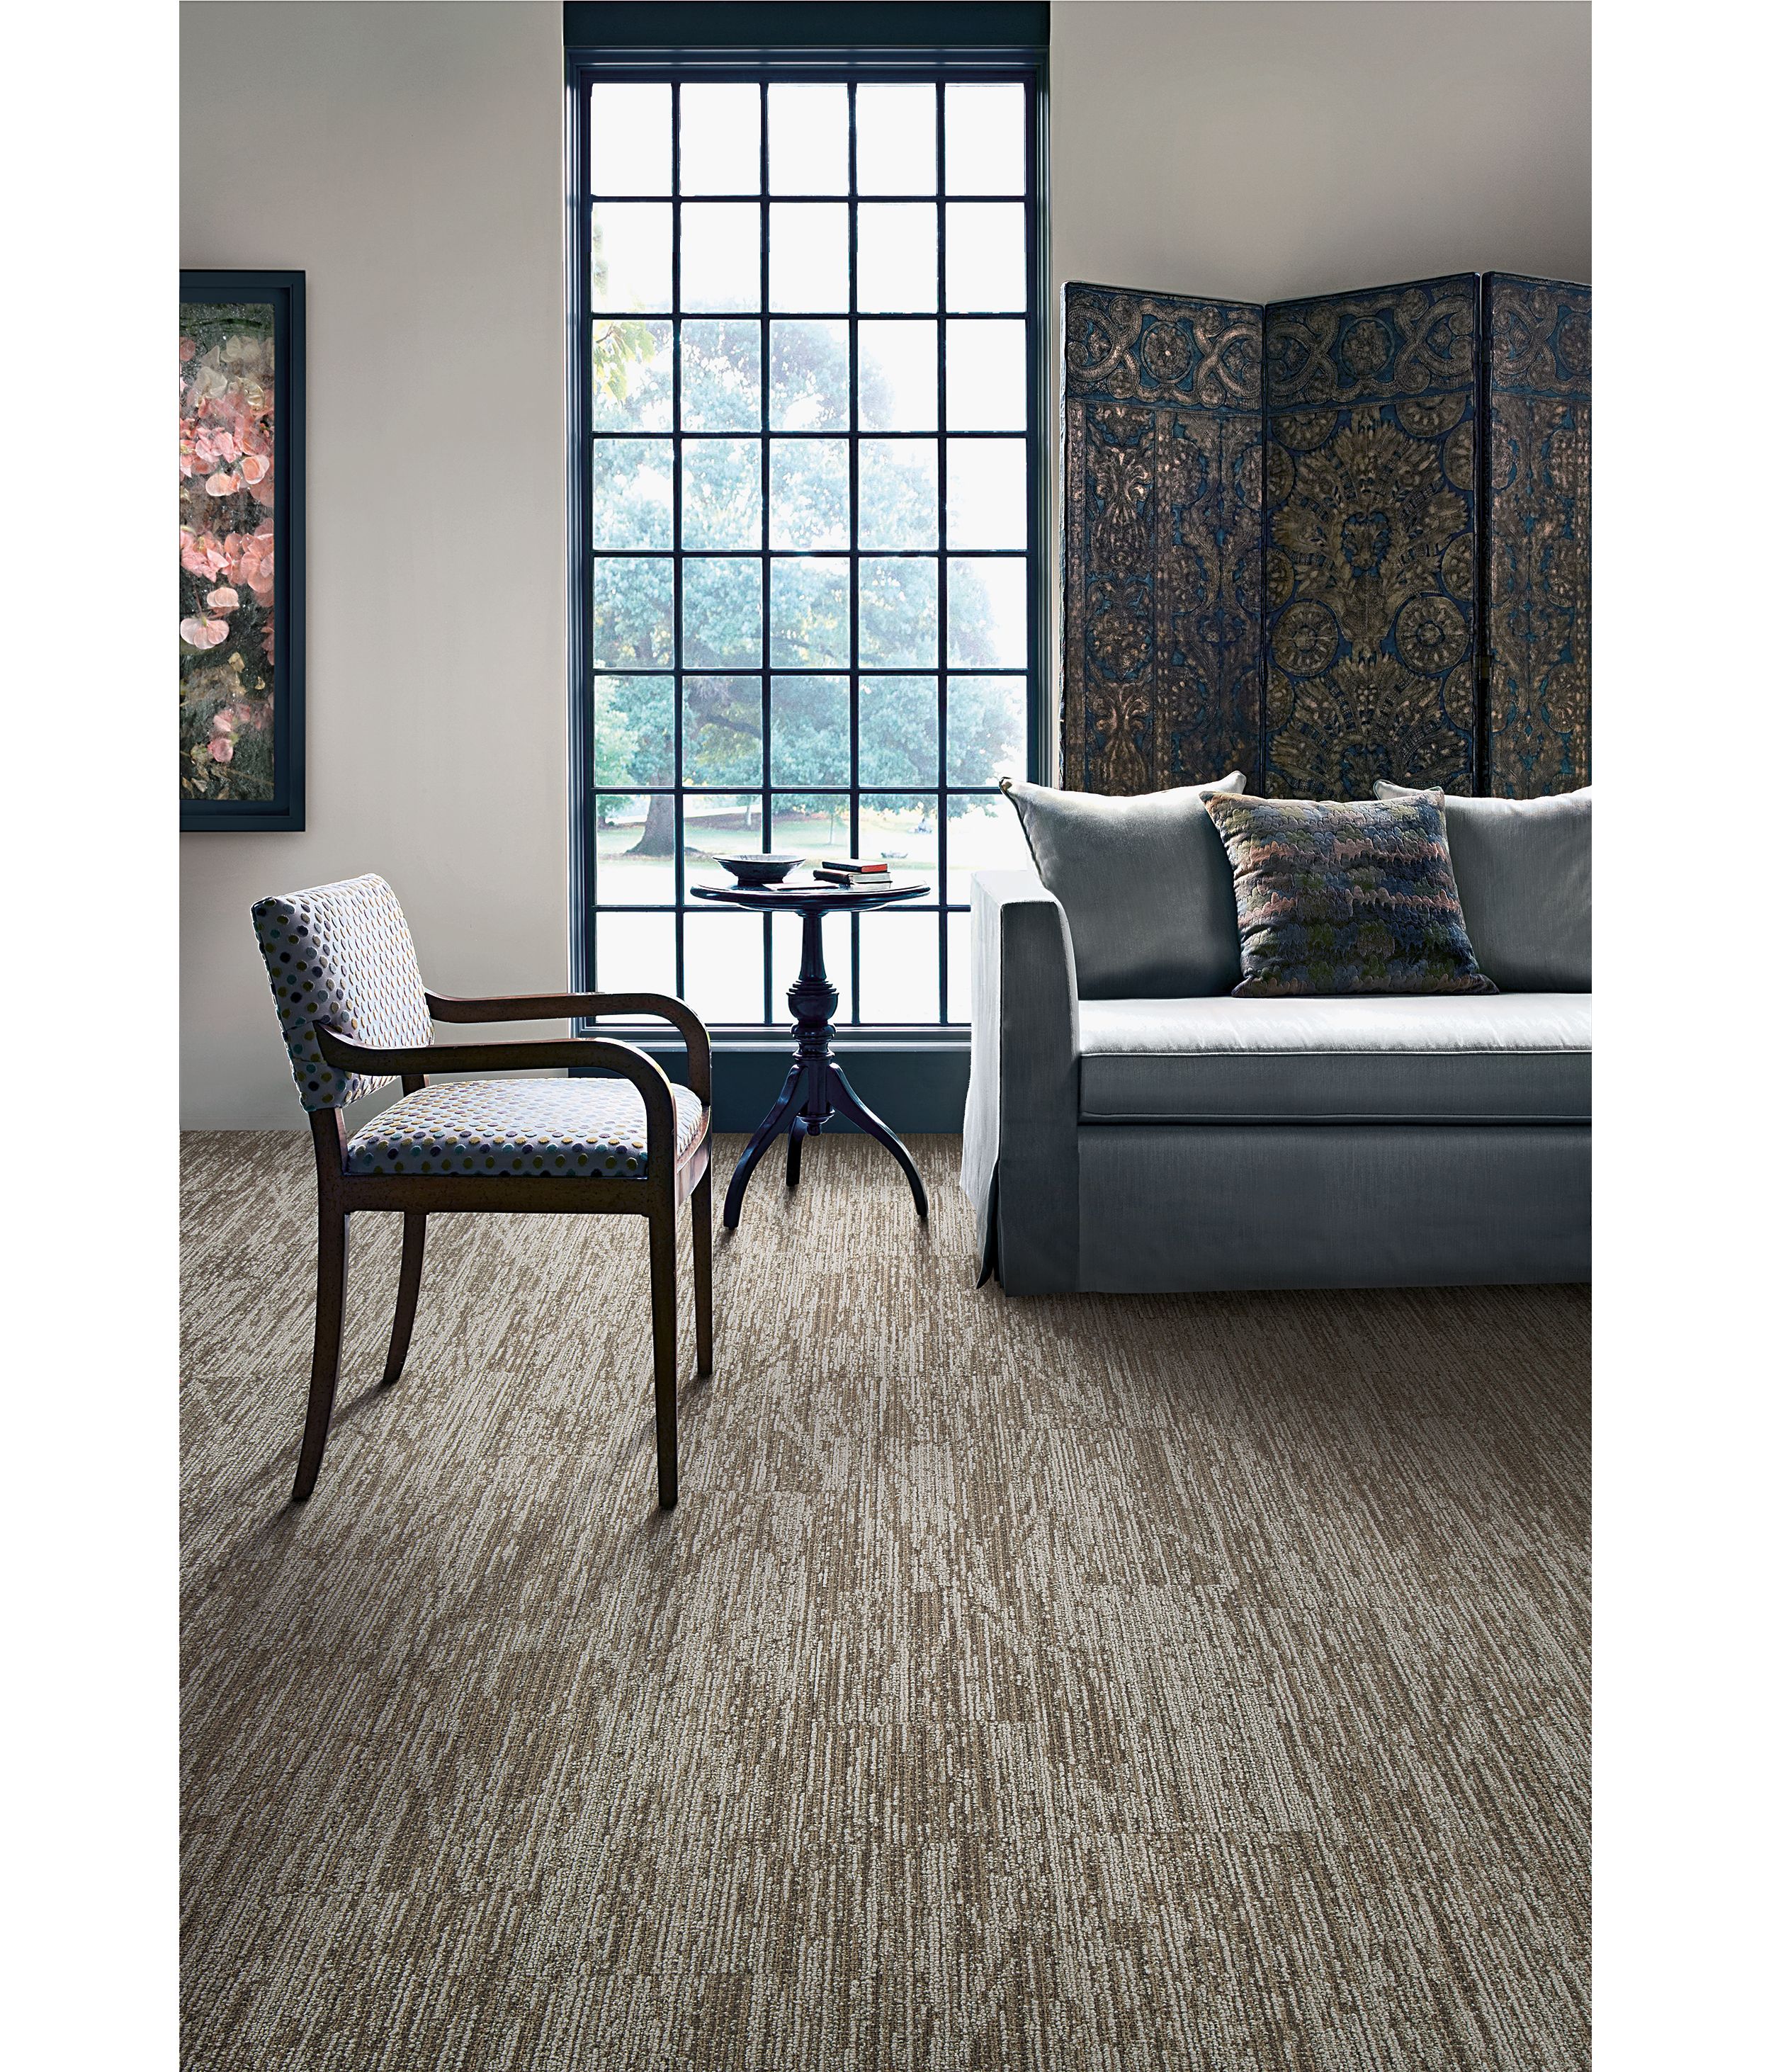 Interface WE151 carpet tile in seating area with chair and couch numéro d’image 3